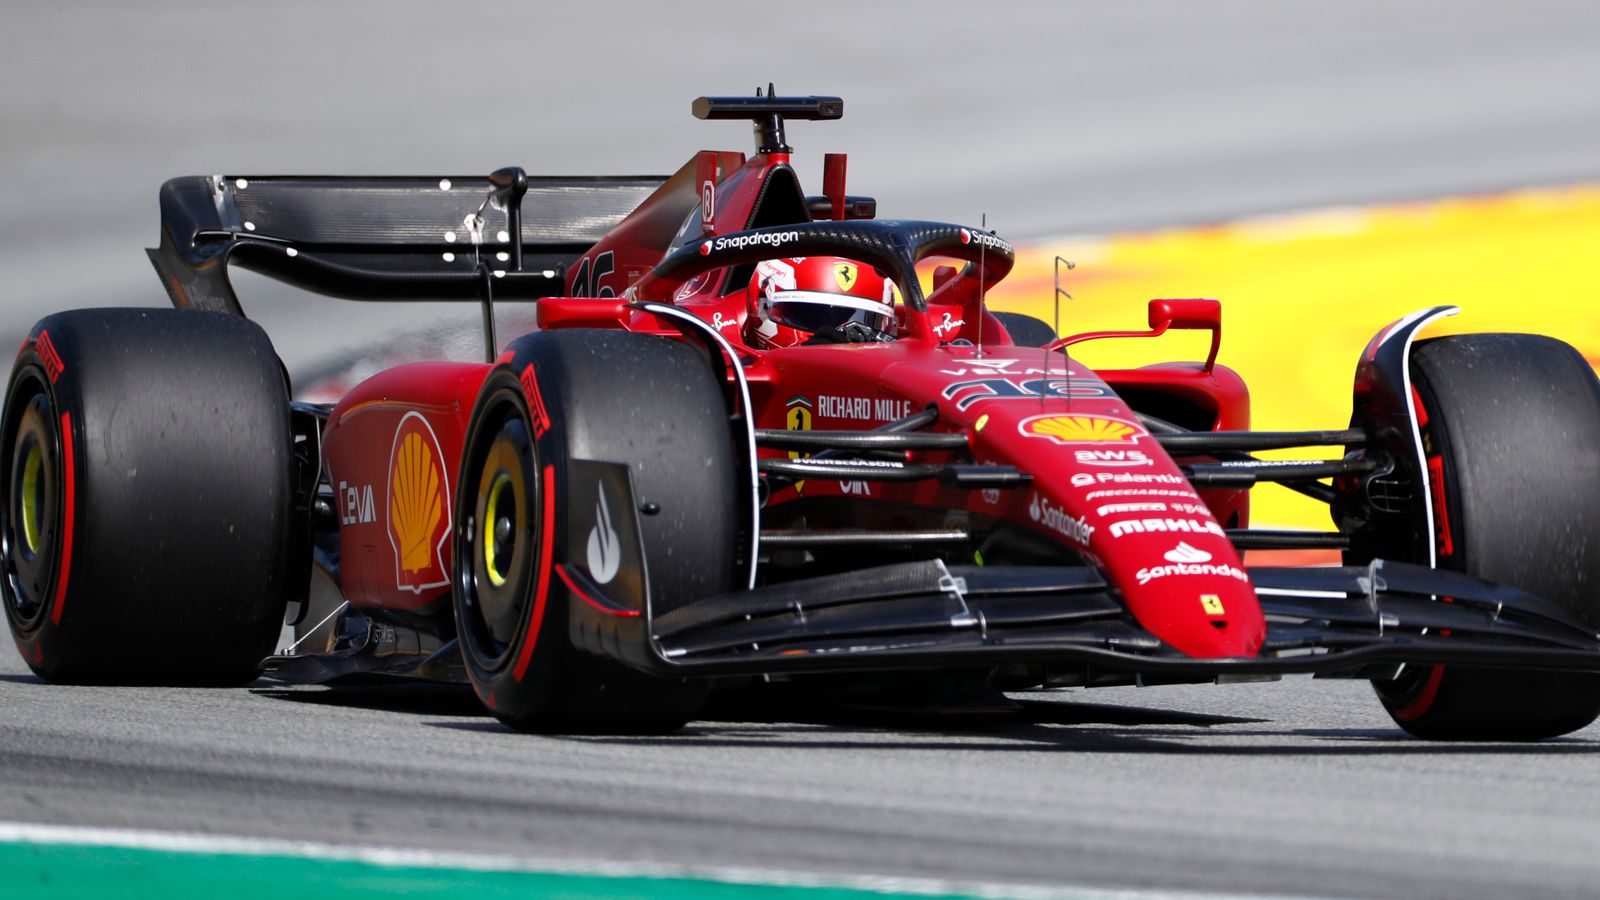 Spanish GP Qualifying: Charles Leclerc salvages epic pole after spin as Max Verstappen suffers late issues